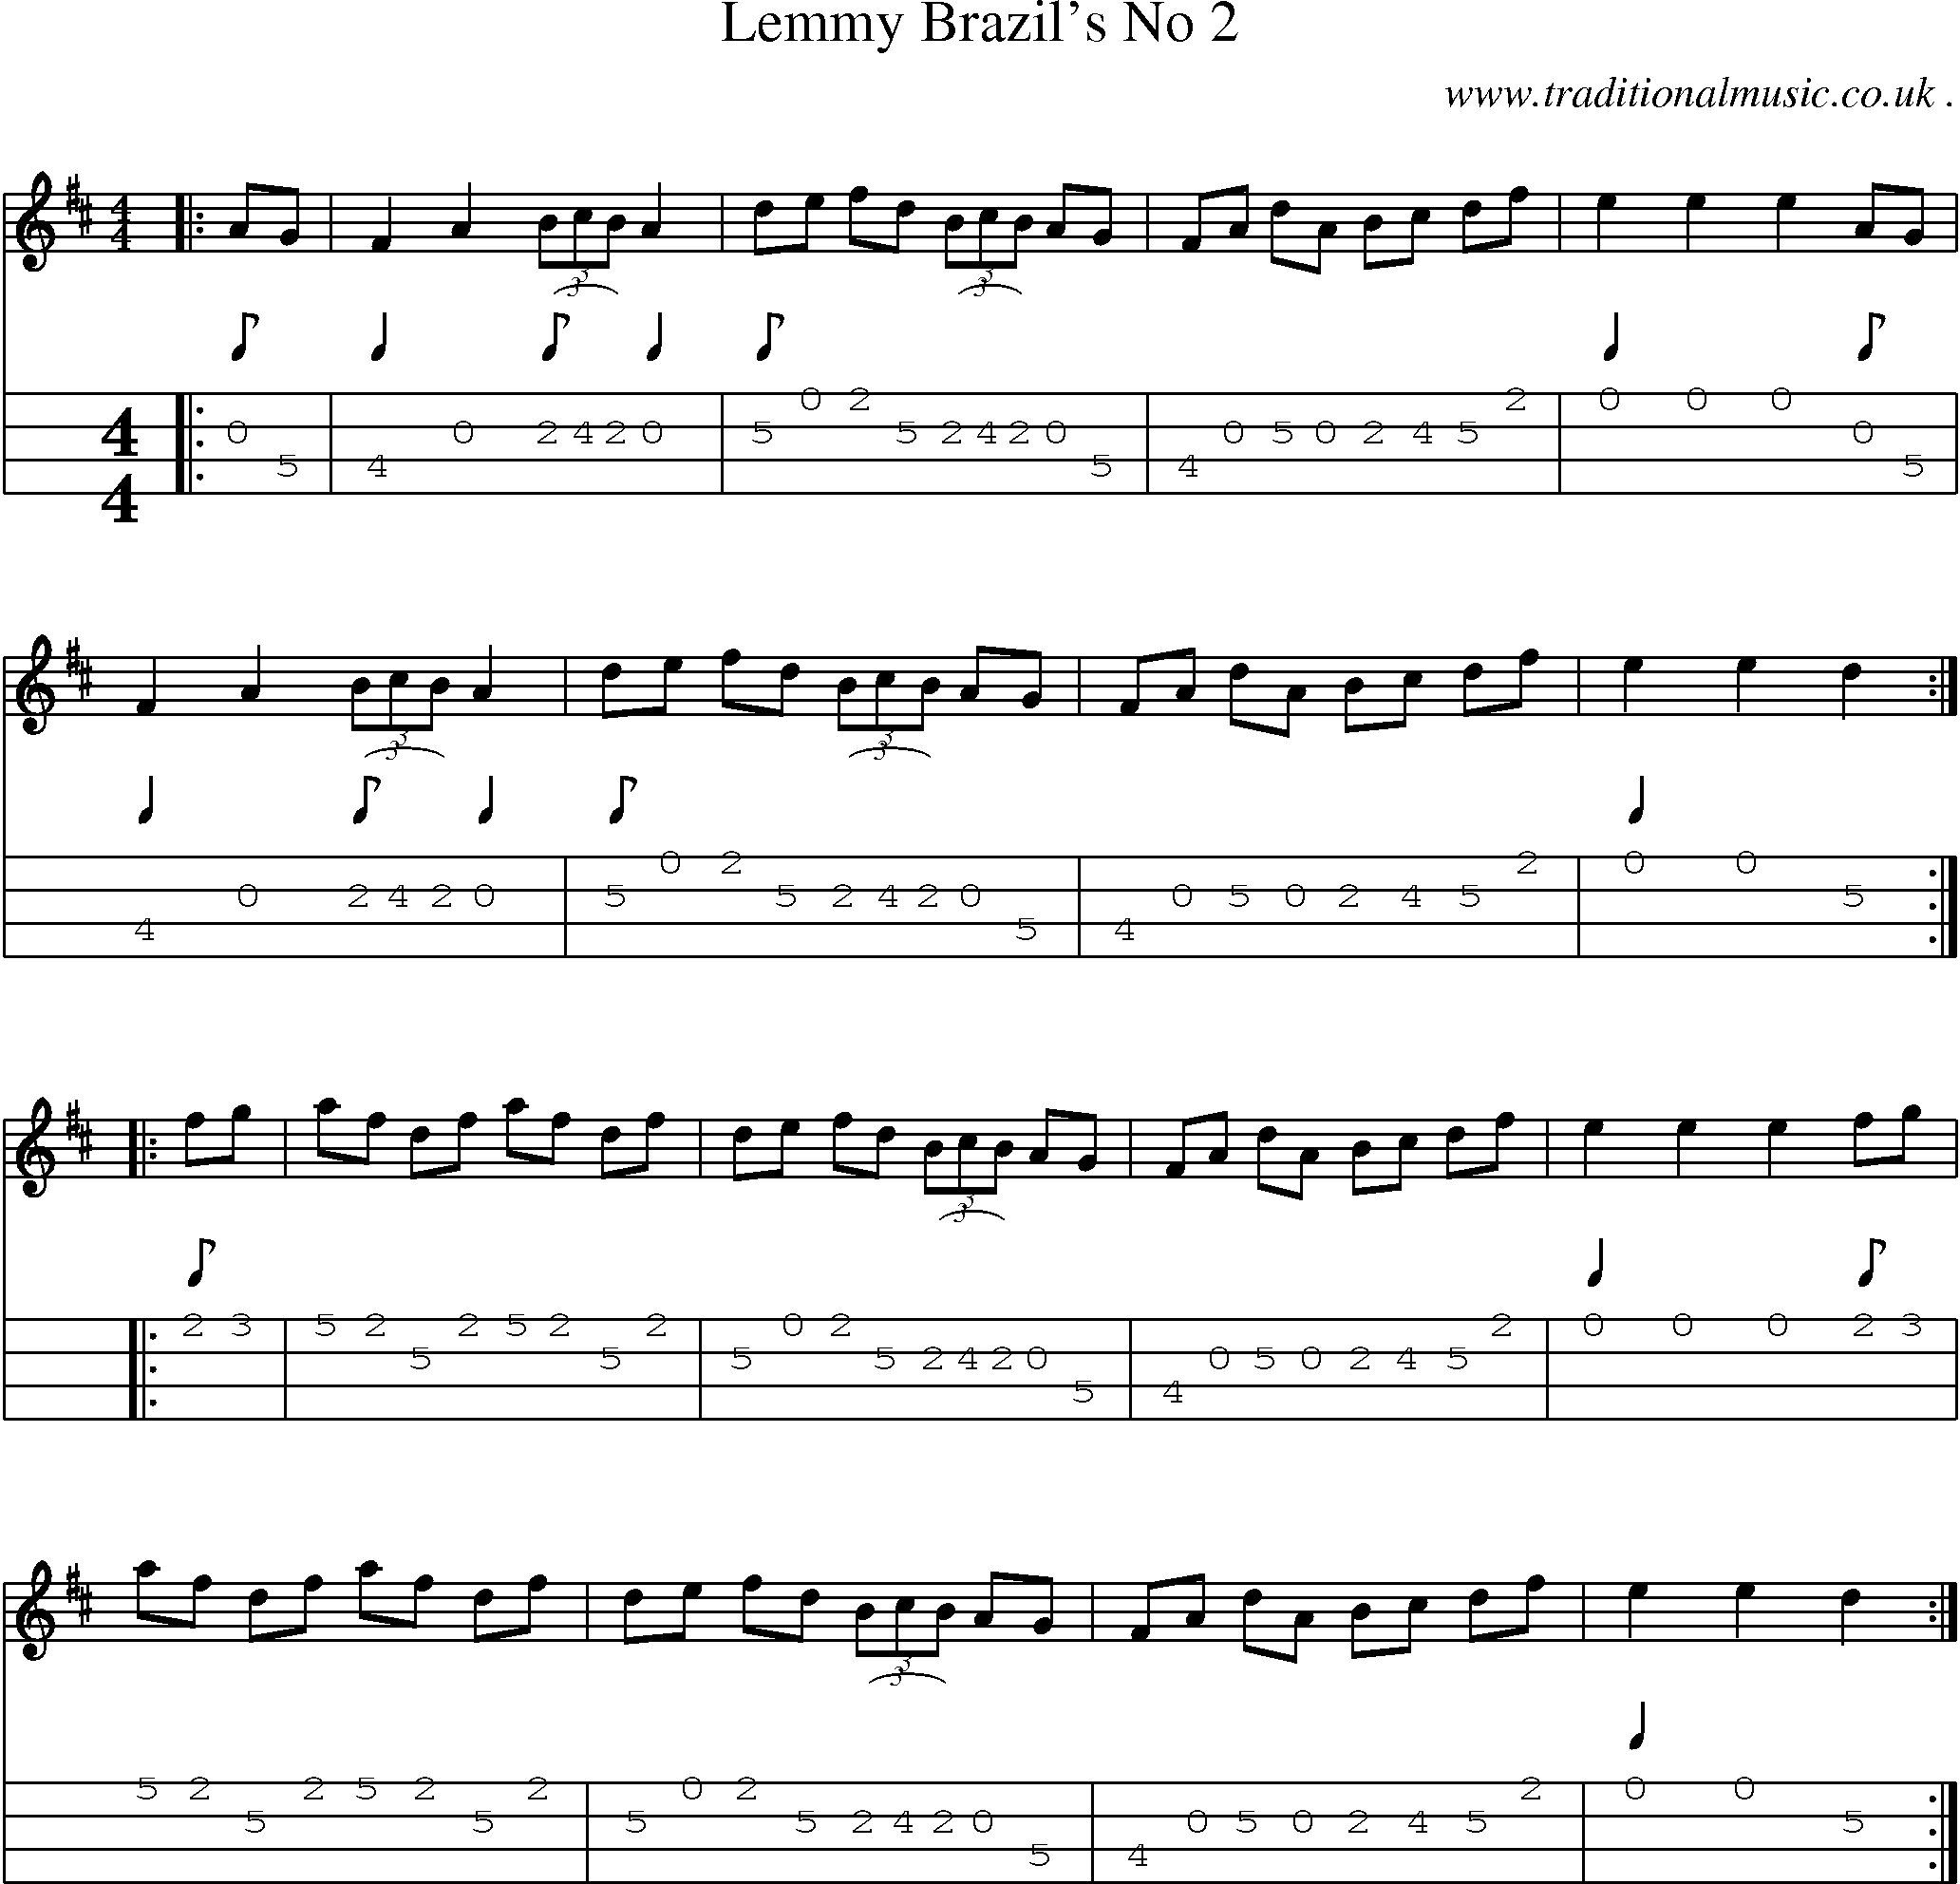 Sheet-Music and Mandolin Tabs for Lemmy Brazils No 2